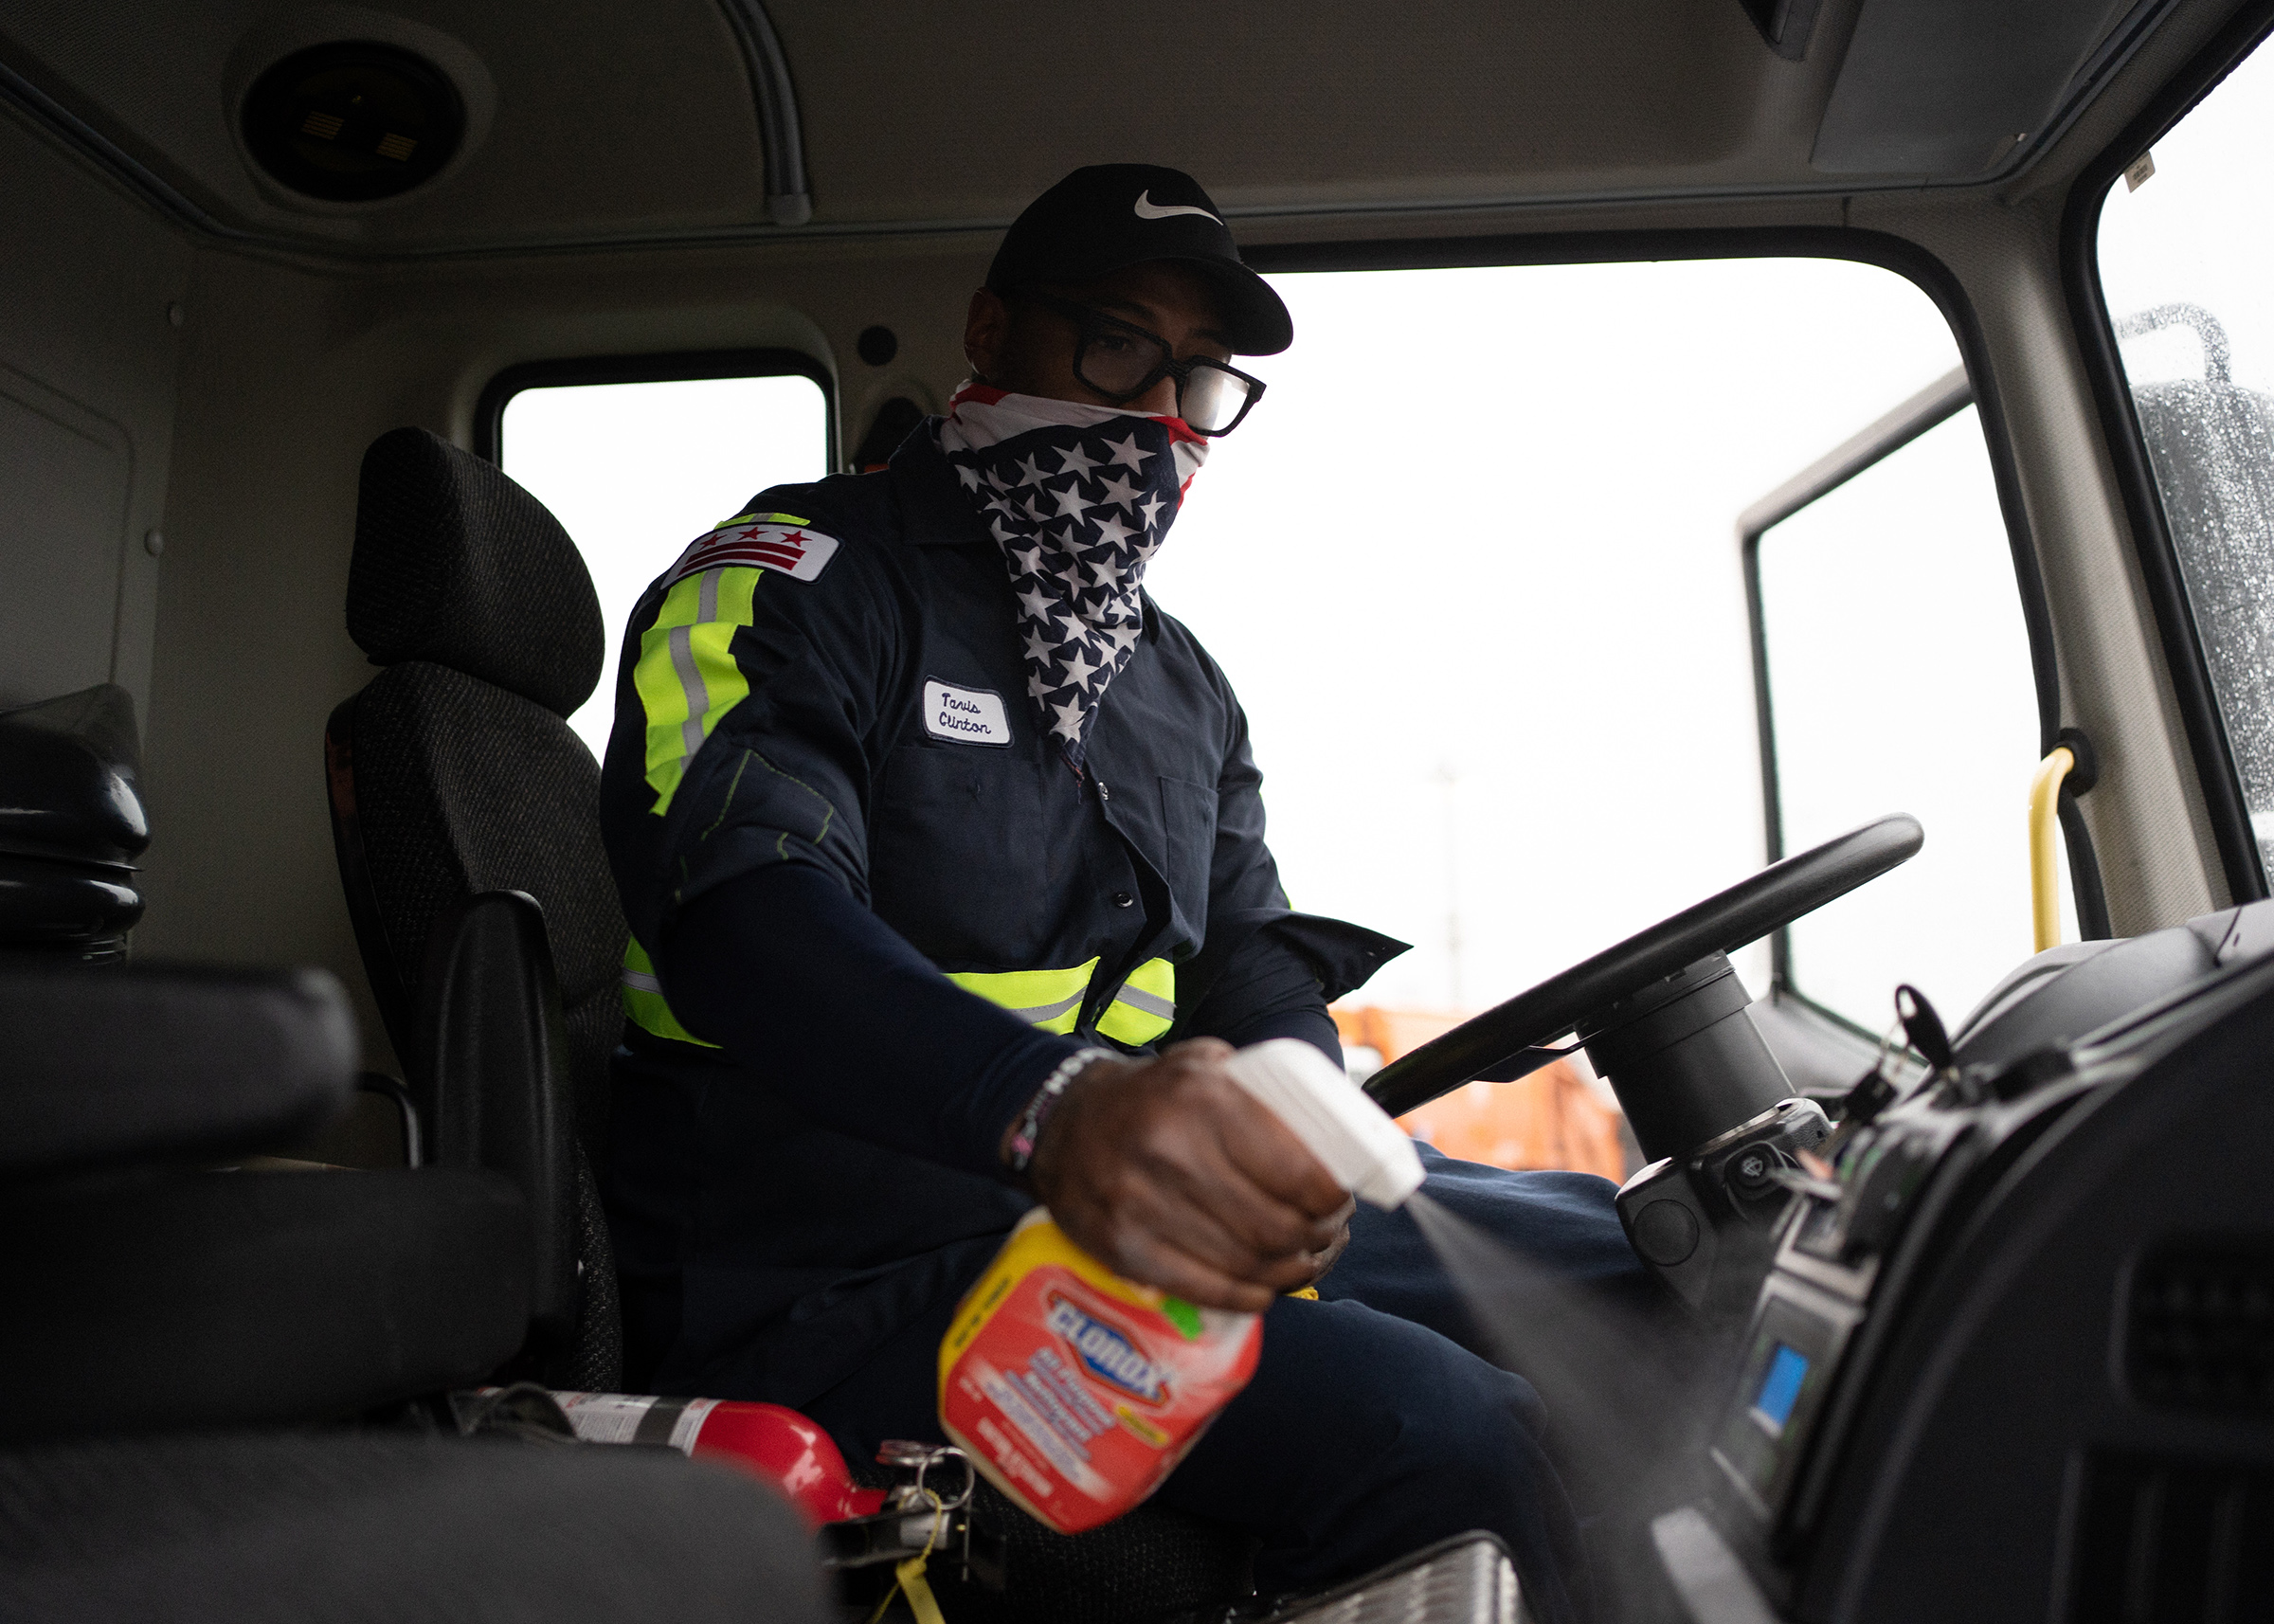 Sanitation Crew Chief, Tavis Clinton, 41, disinfects his truck before beginning his route.